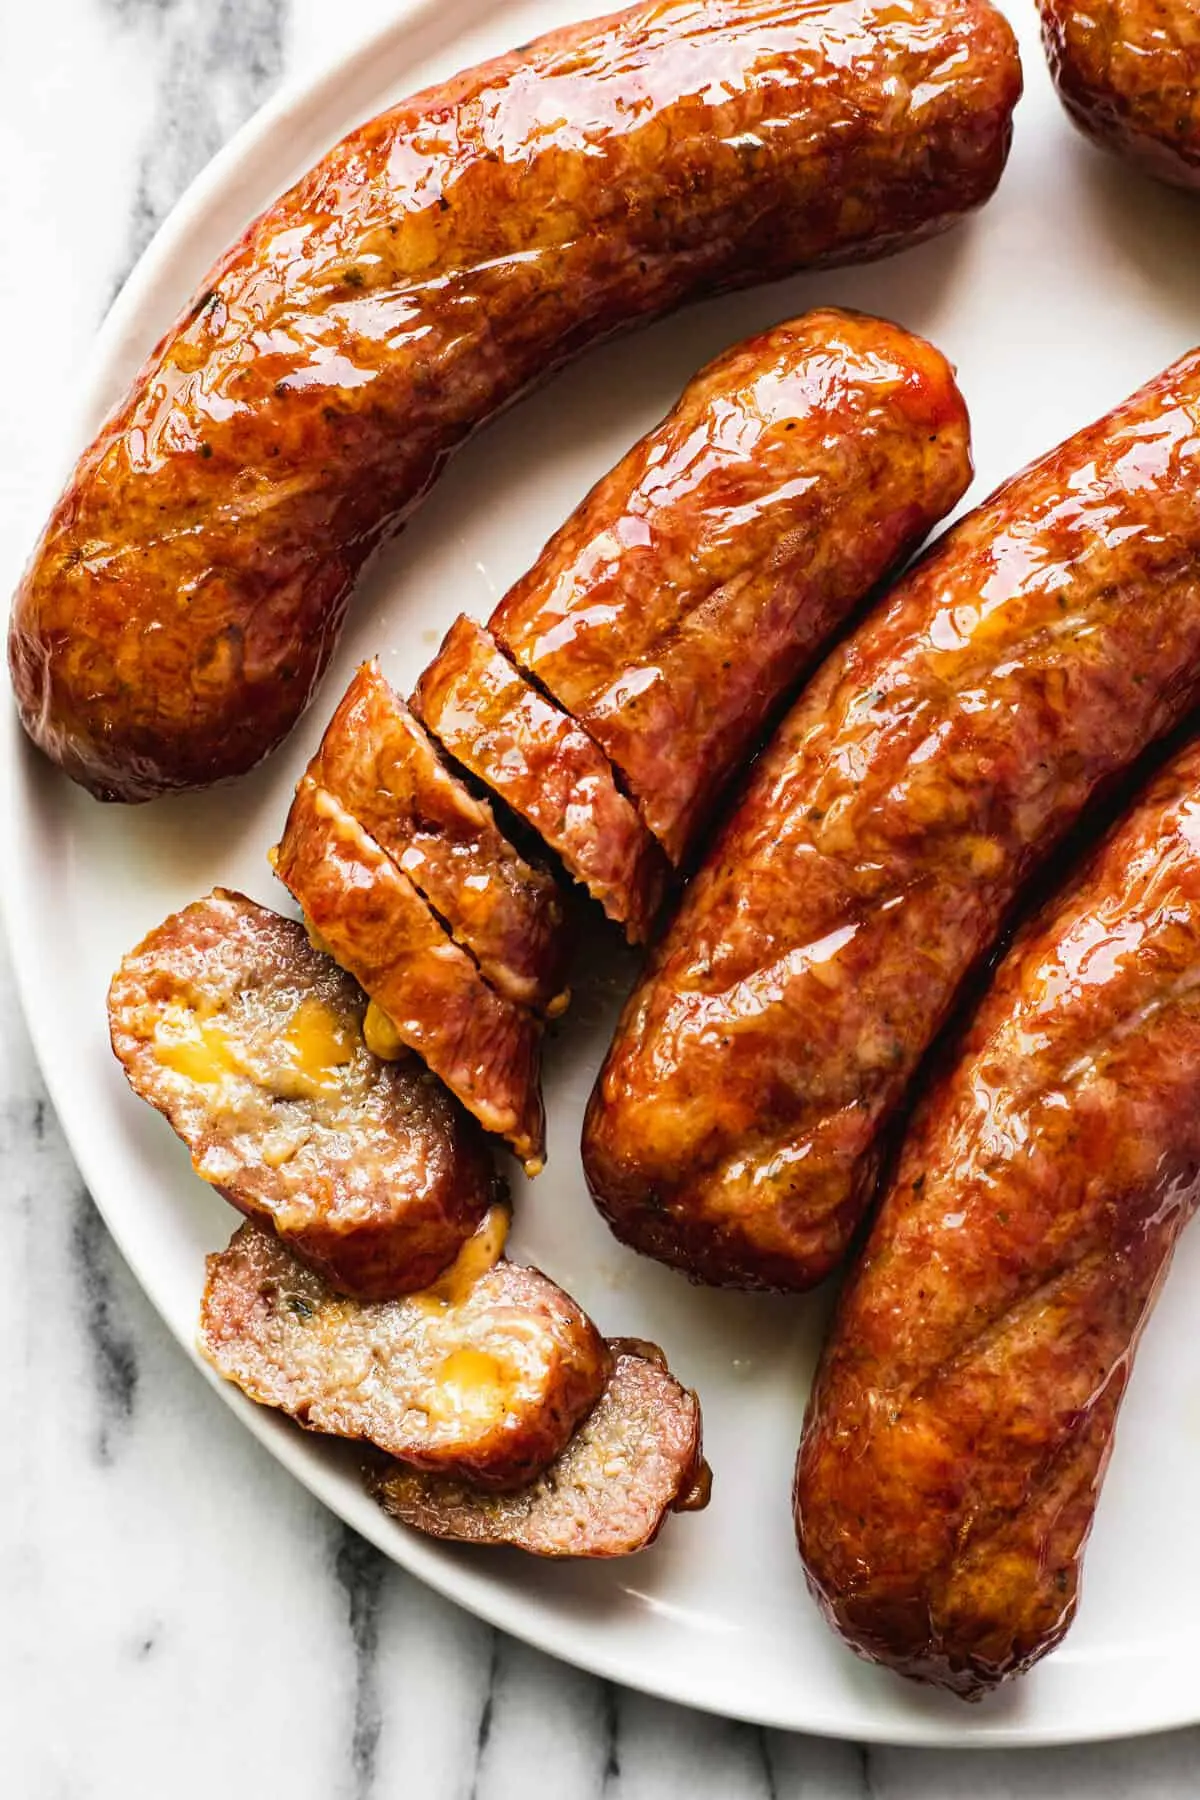 pre cooked smoked sausage - Do you cook pre-cooked sausages